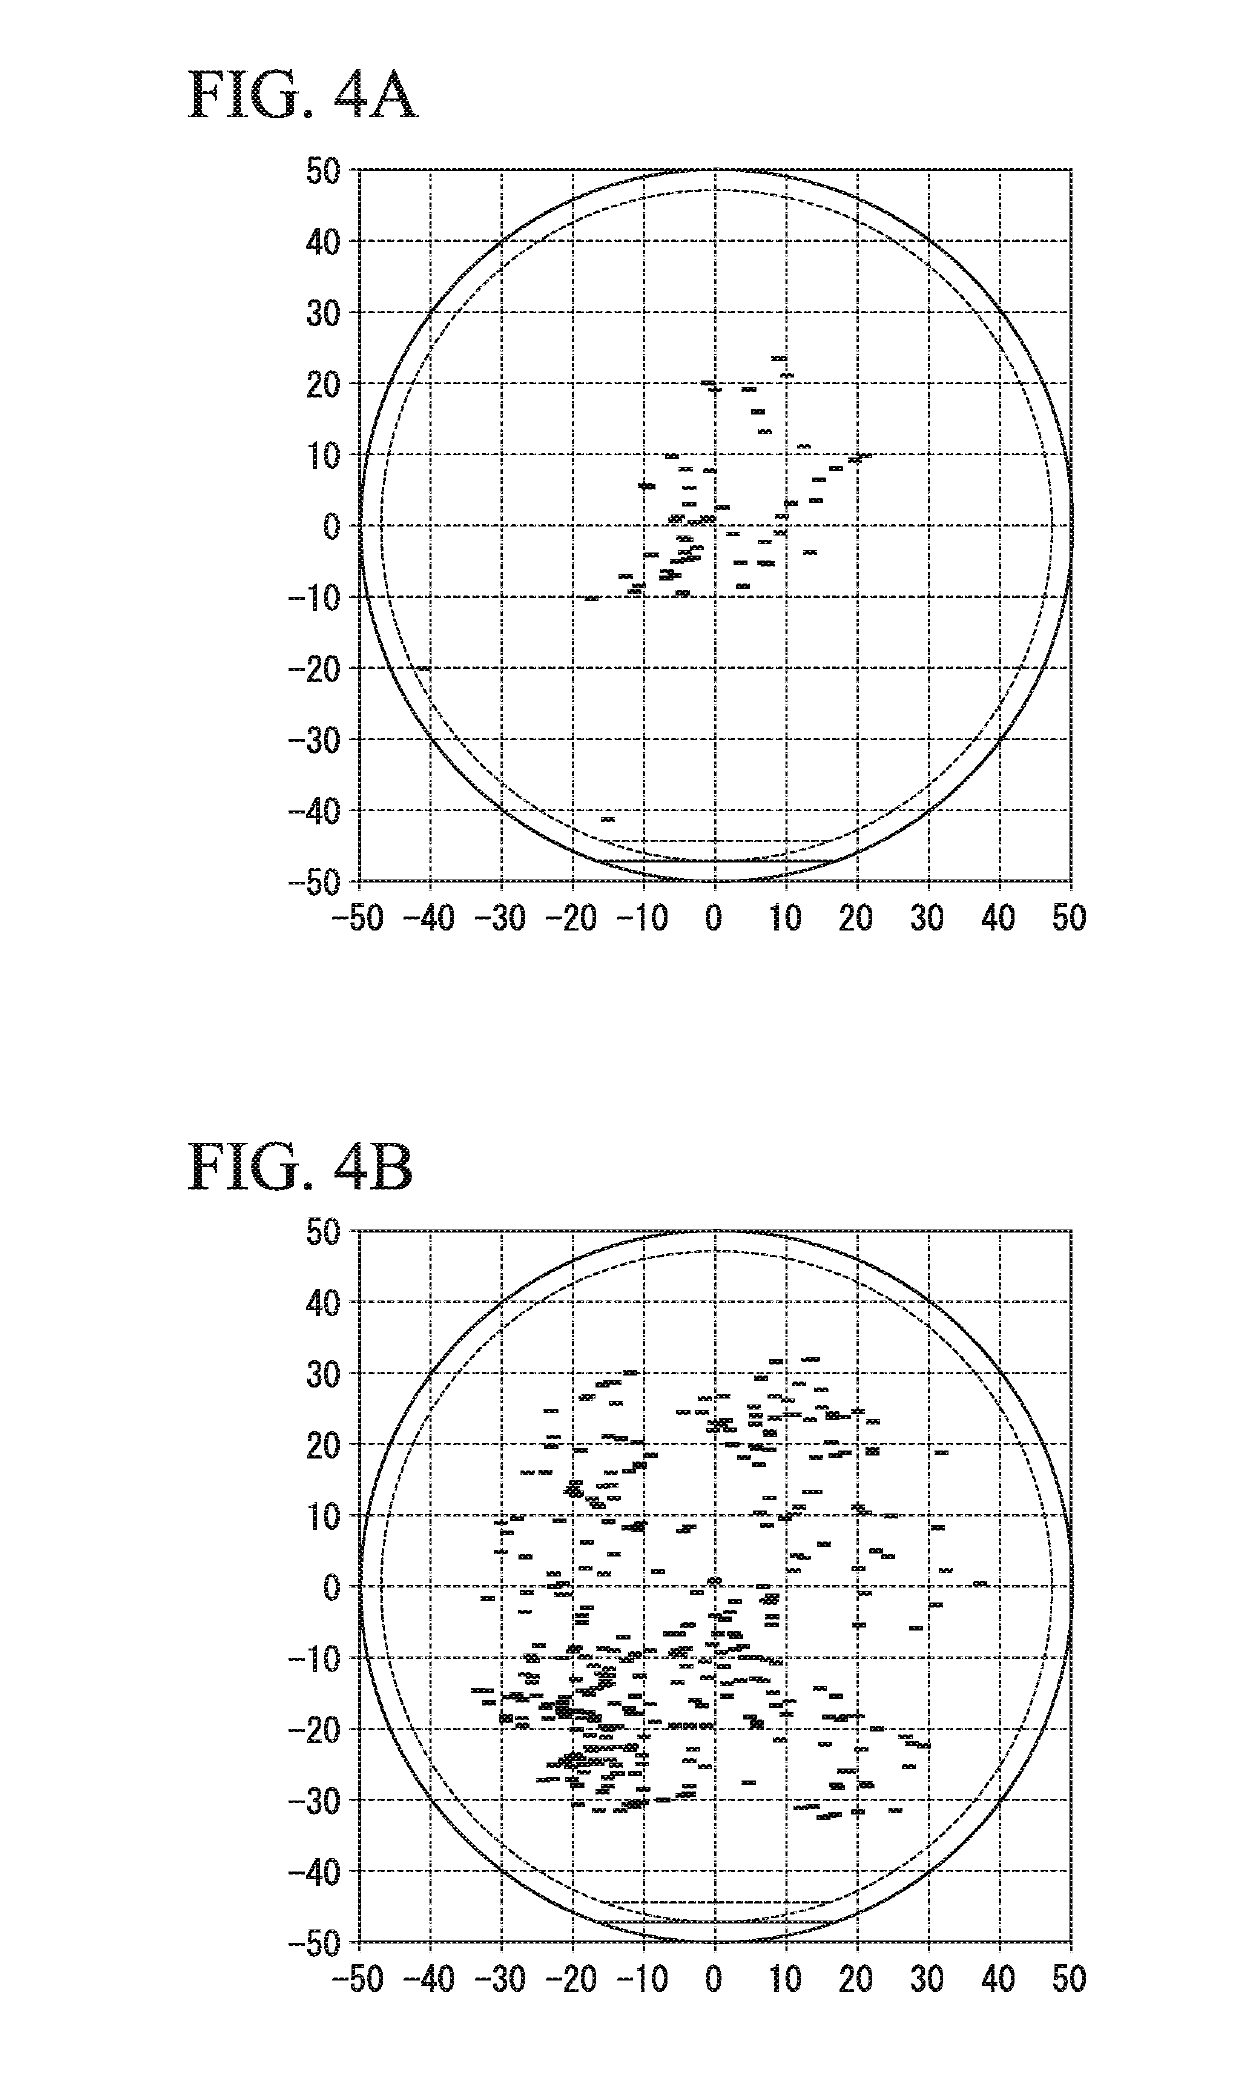 Sic epitaxial wafer